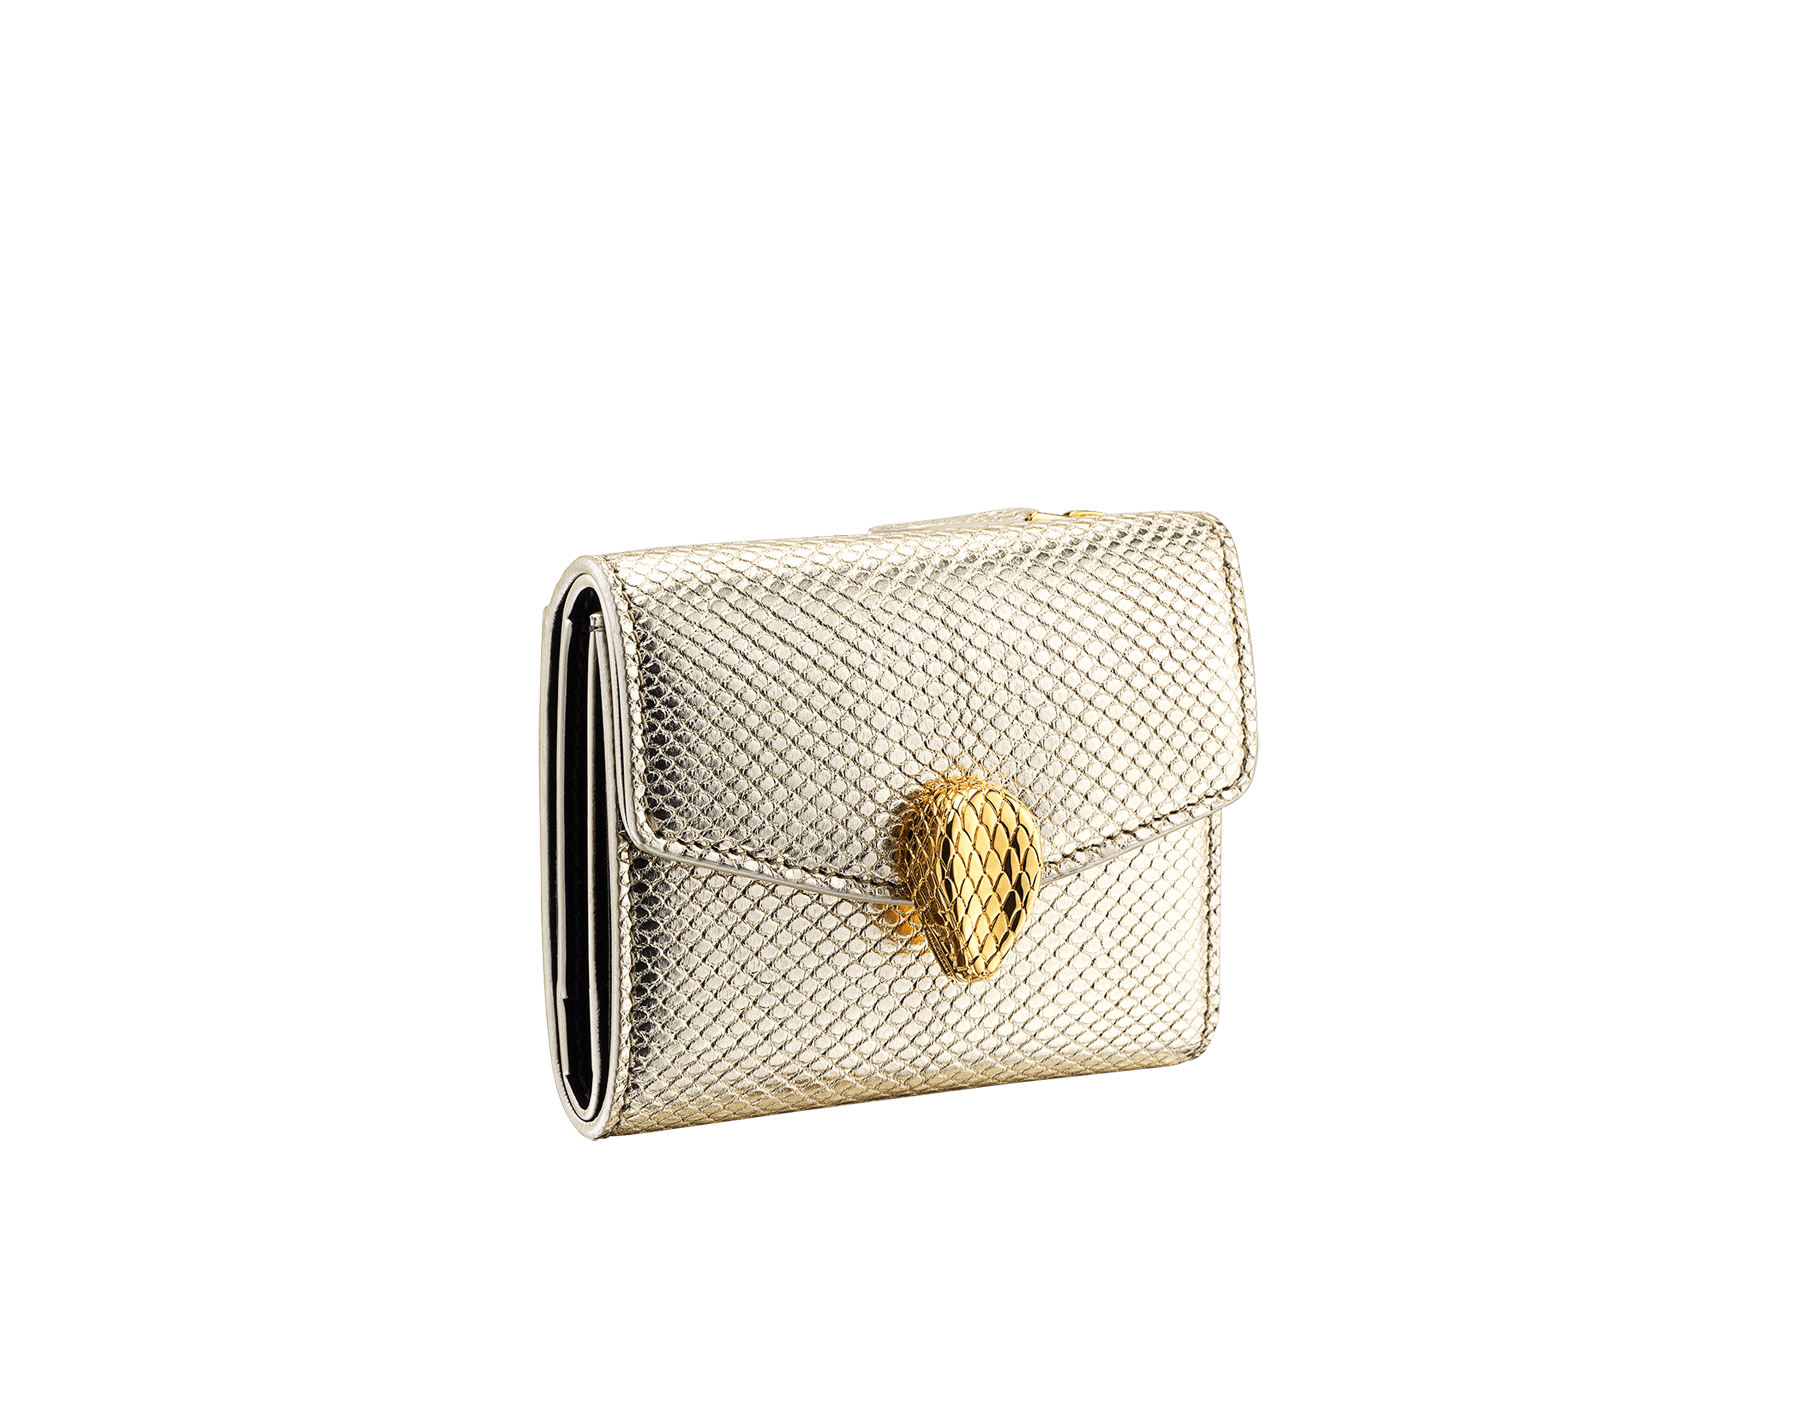 Slender, compact "Serpenti Forever" wallet in "Molten" gold karung skin and black calfskin, offering a touch of radiance for the Winter Holidays. New Serpenti head closure in gold-plated brass, complete with ruby-red enamel eyes. SEA-SLIMCOMPACT-MoltK image 1